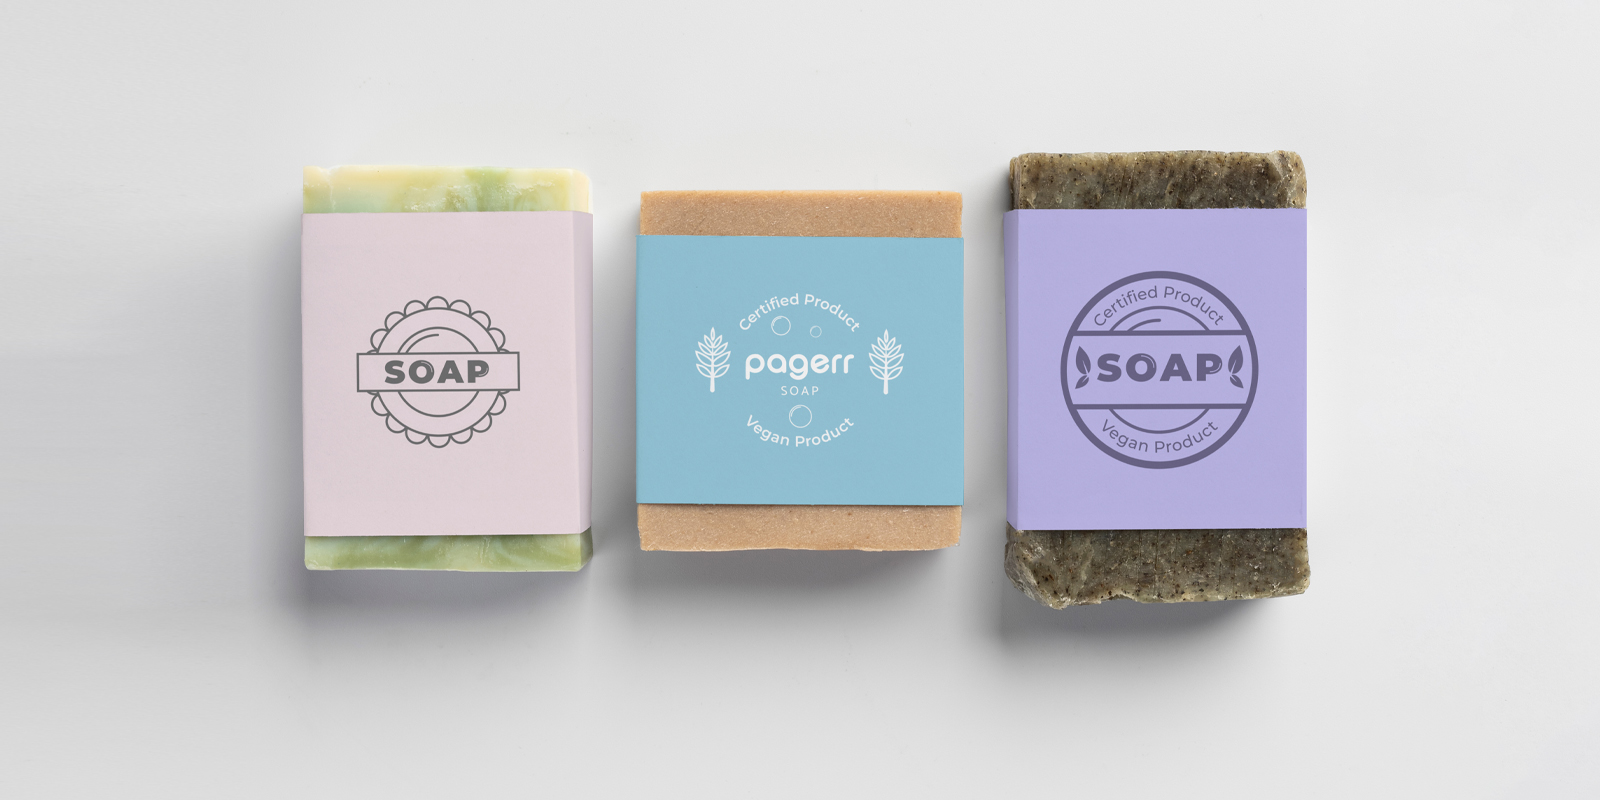 Soap labels in Canberra - Print with Pagerr